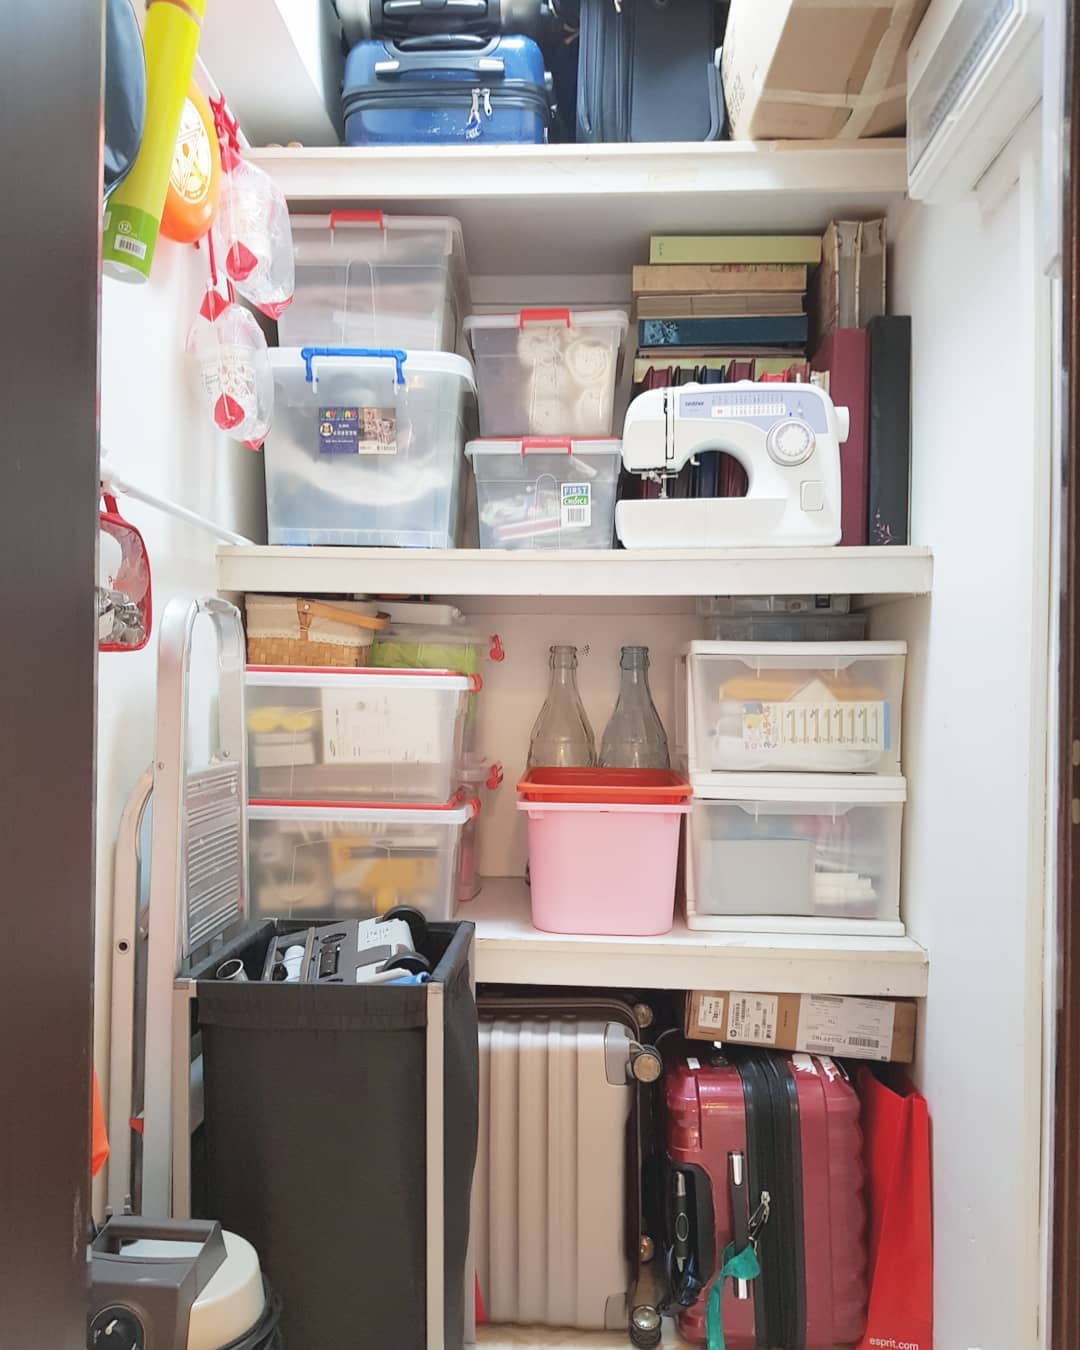 Storage room with storage containers. Photo by Instagram user @e._.laine